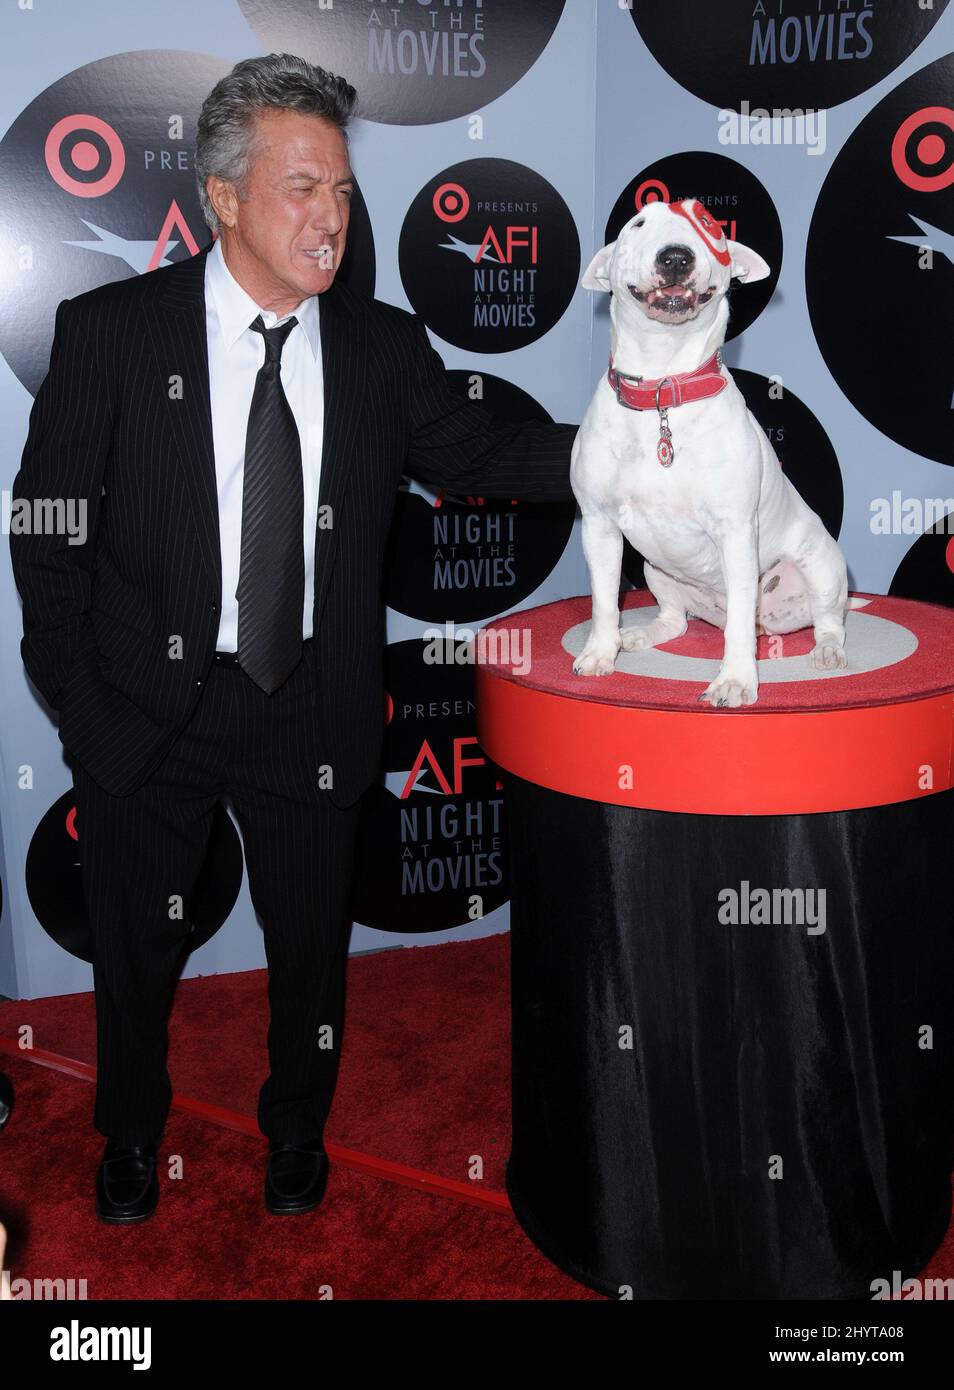 Dustin Hoffman attending TARGET Presents AFI Night at the Movies, Los Angeles. Stock Photo